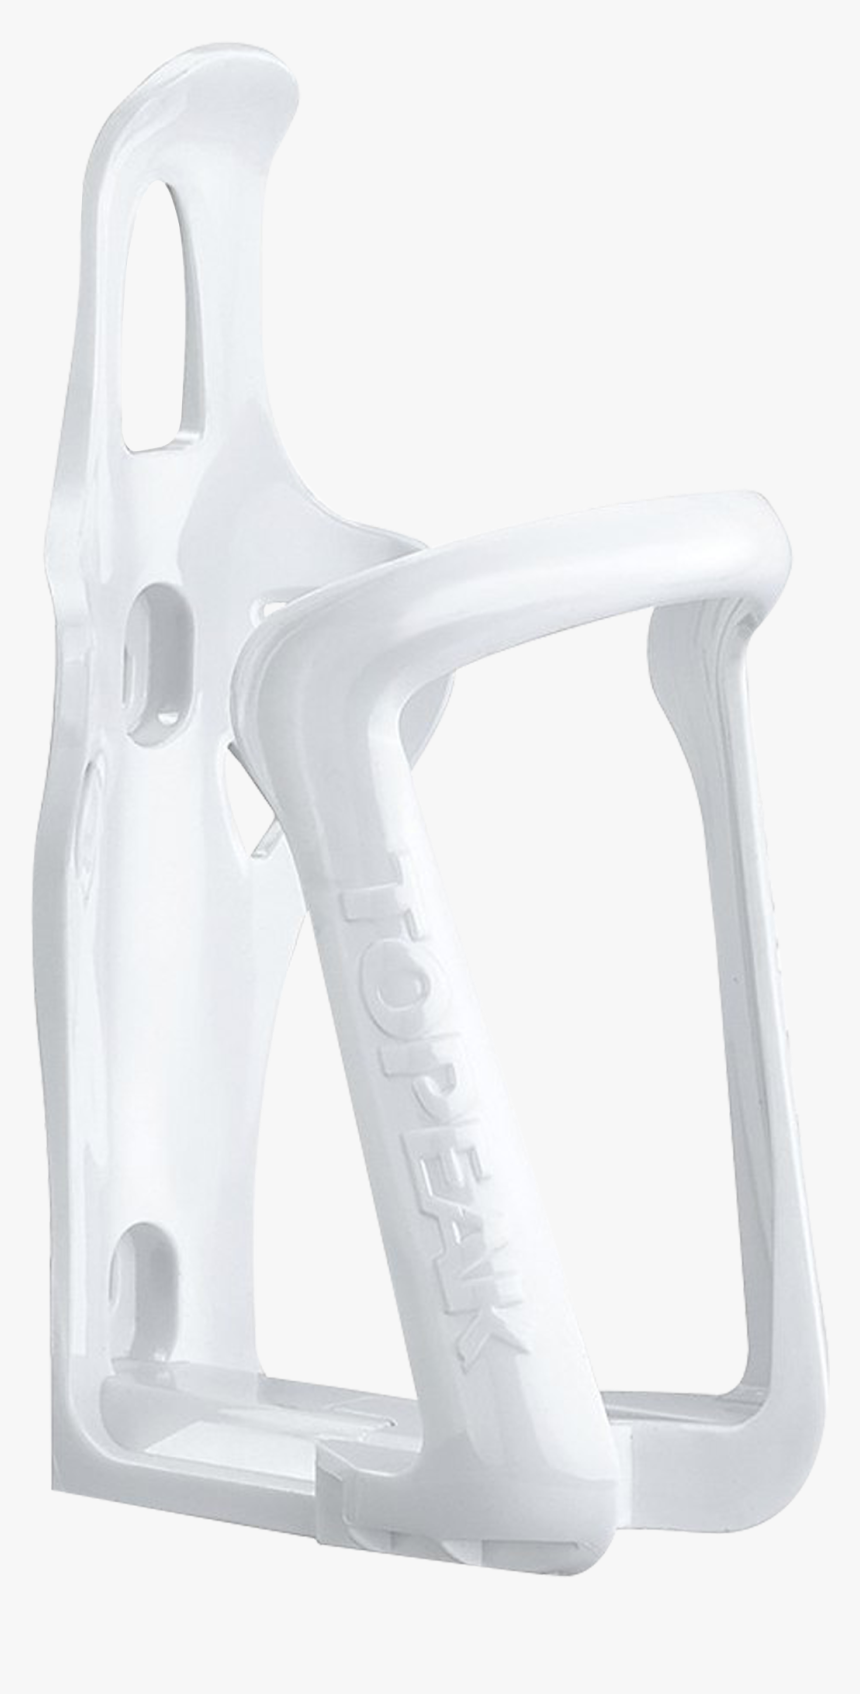 Topeak Mono Bottle Cage - Tool, HD Png Download, Free Download